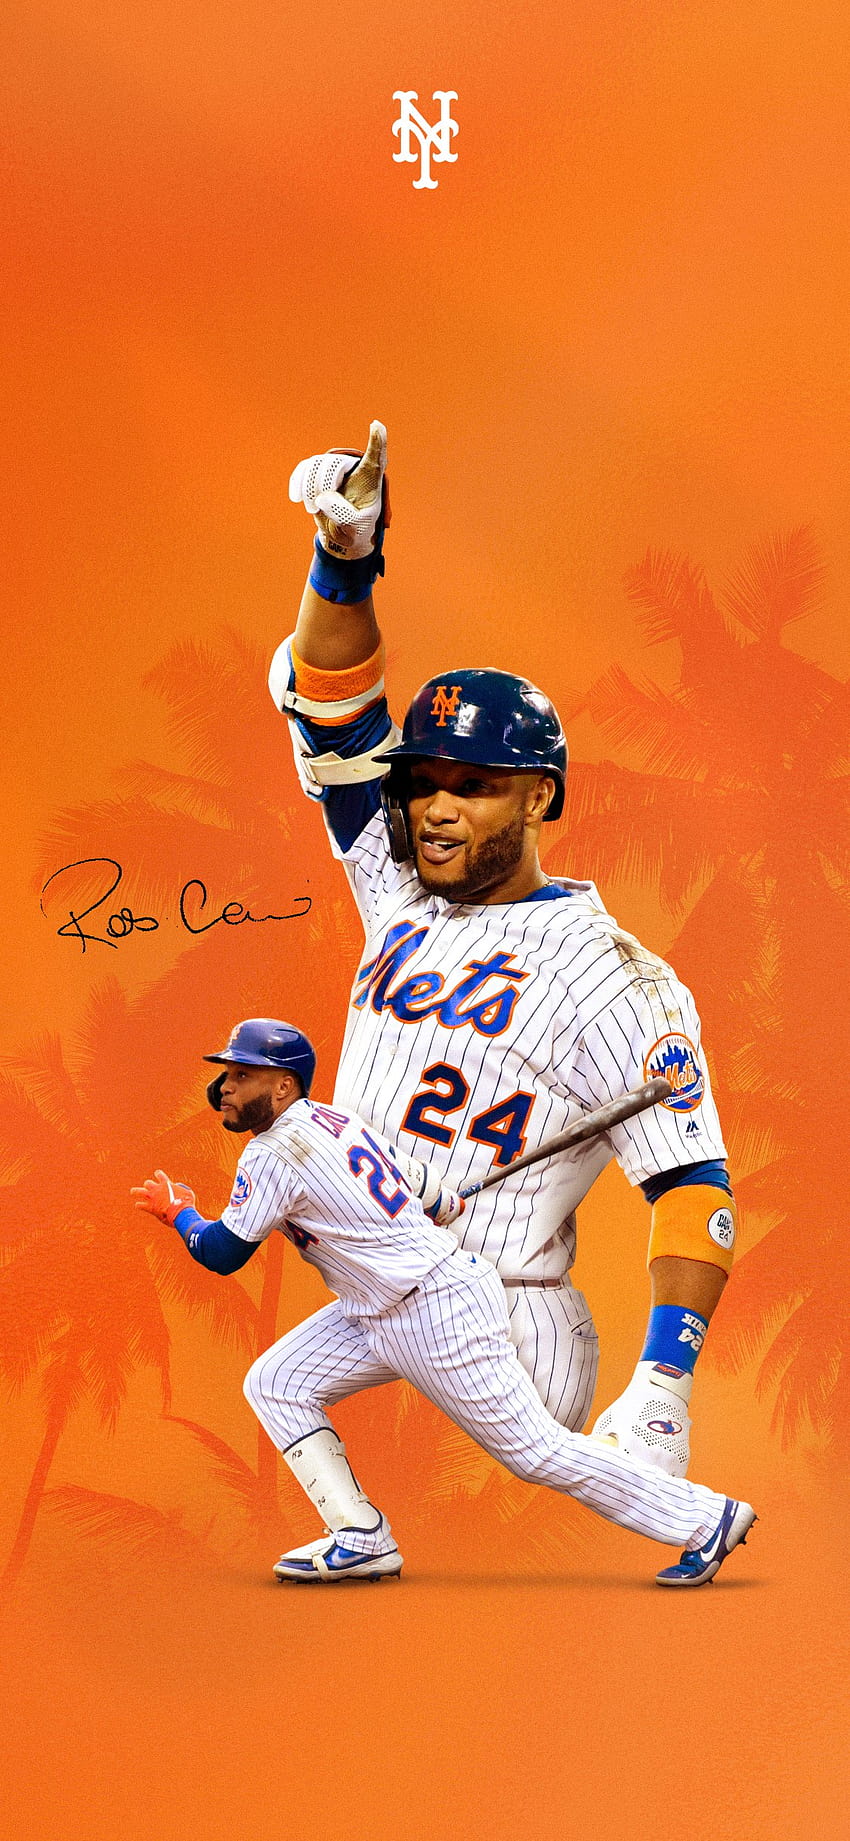 A wallpaper of Sugar inspired by some that the Mets released earlier this  year hope you all enjoy it  rNewYorkMets